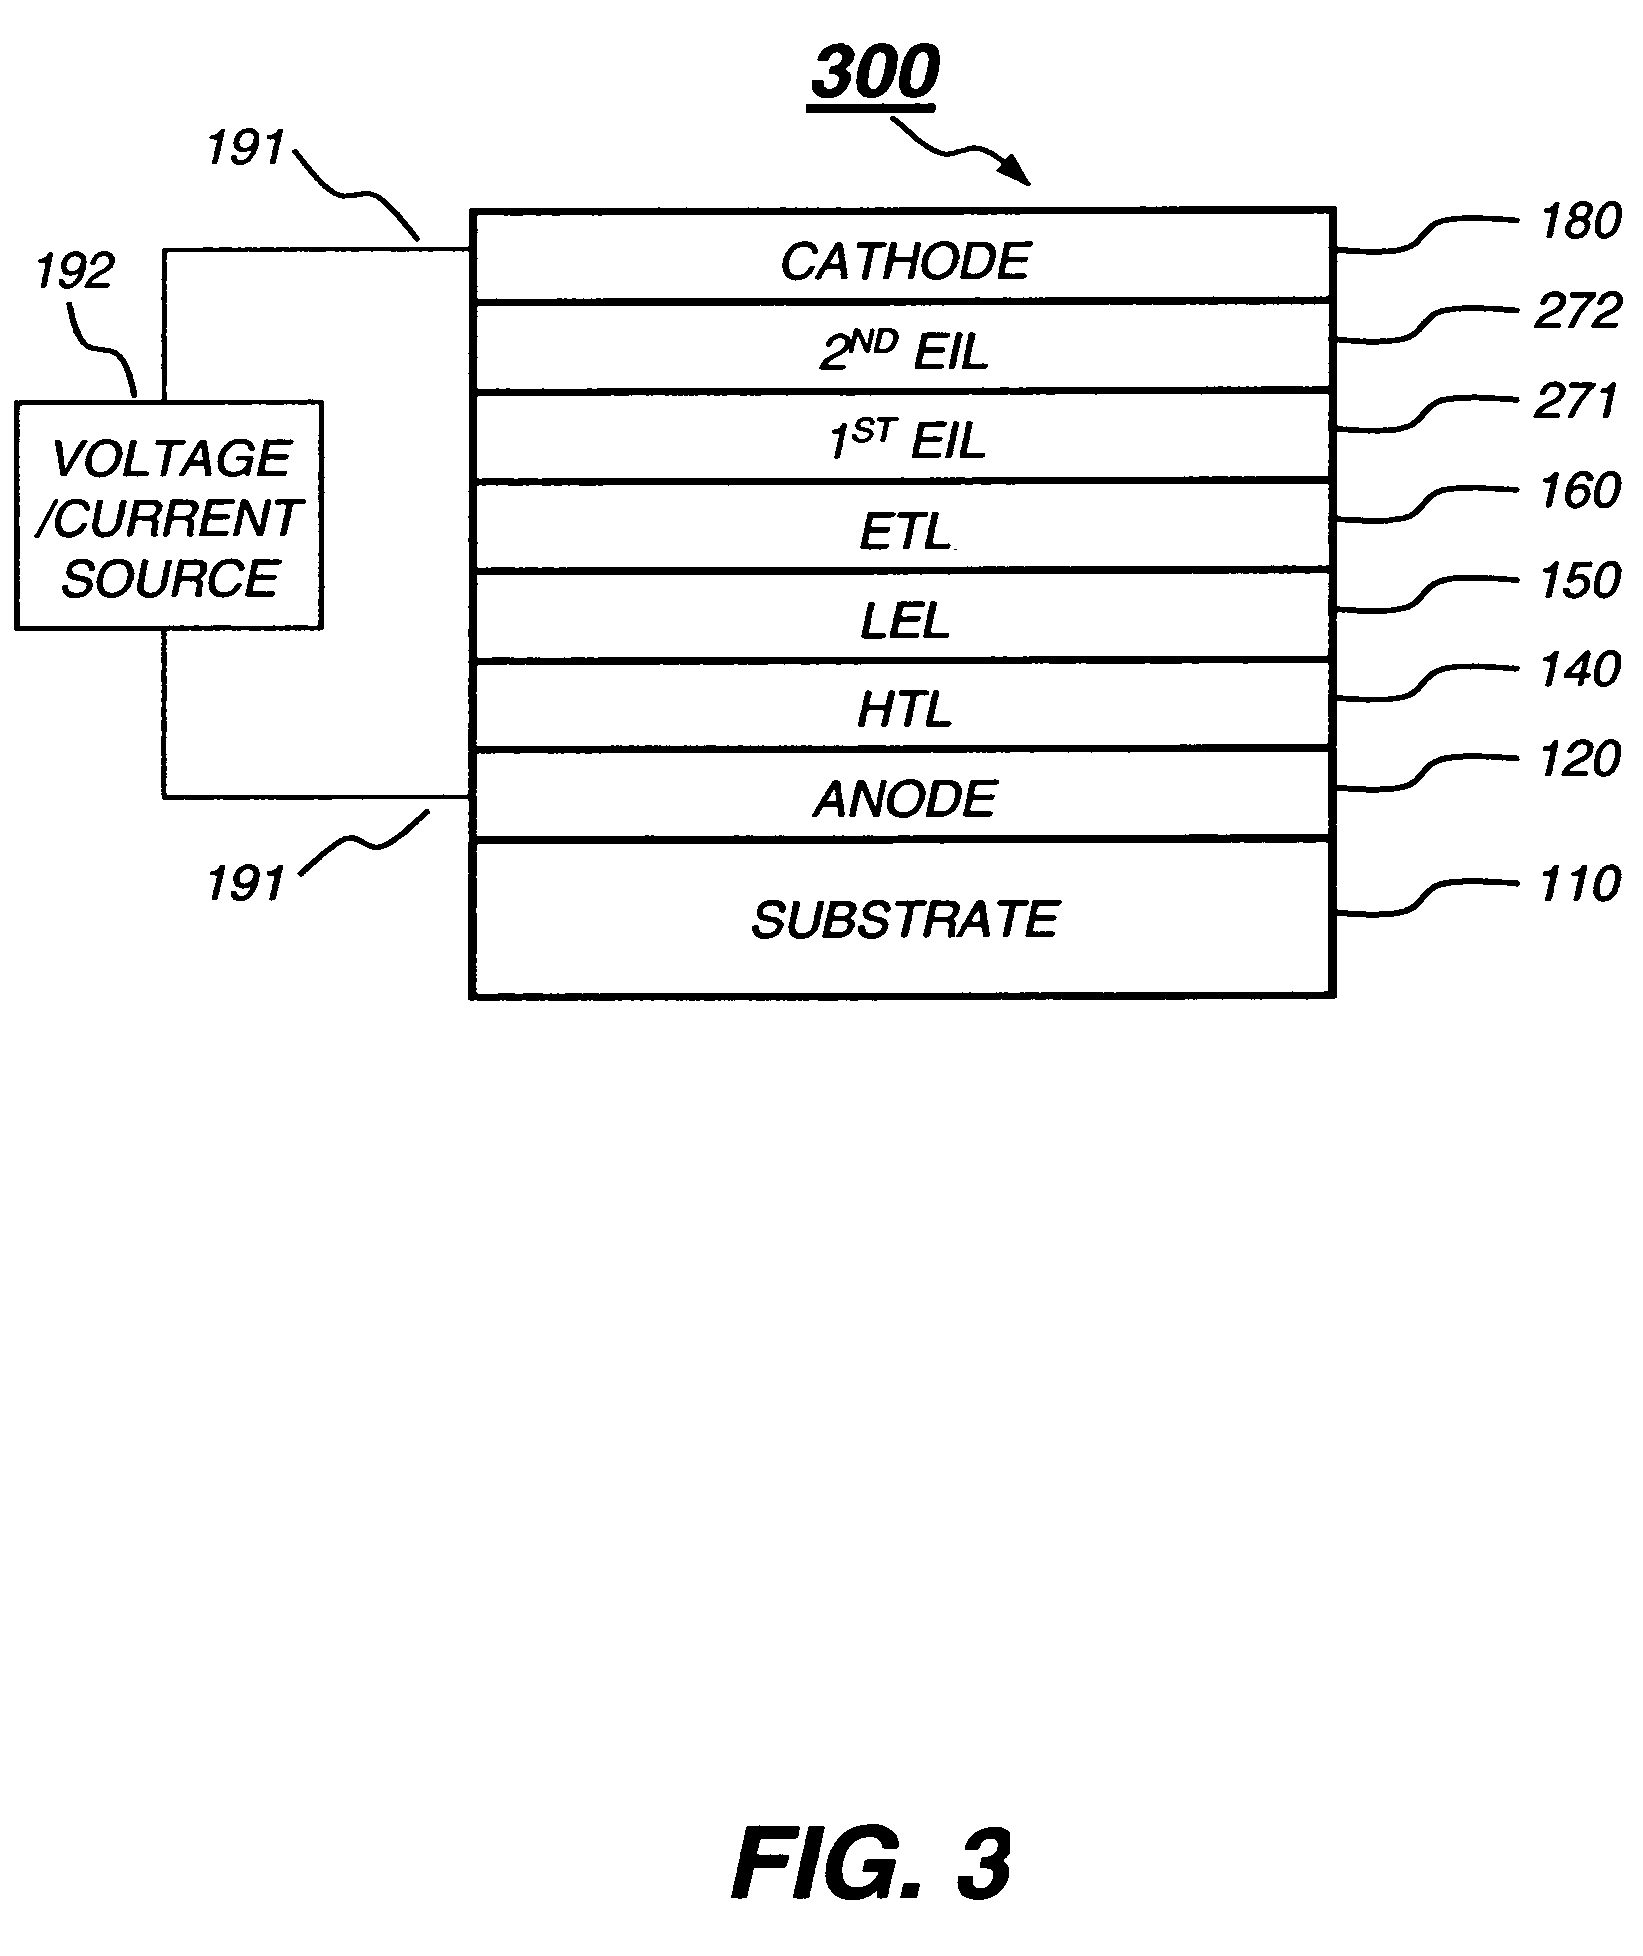 OLED electron-injecting layer